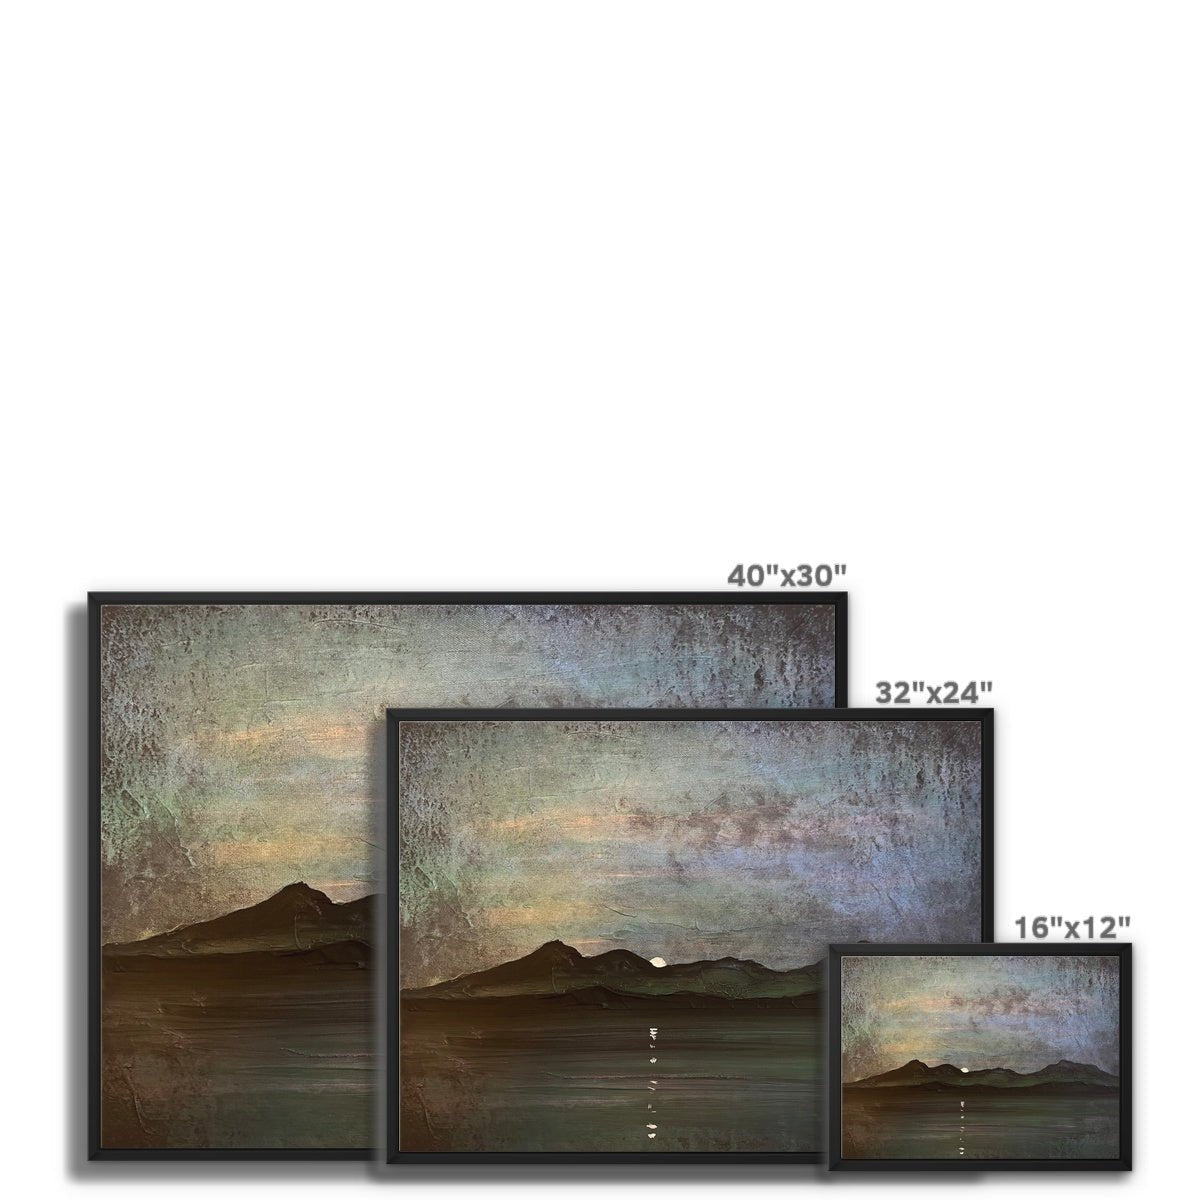 Sleeping Warrior Moonlight Arran Painting | Framed Canvas From Scotland-Floating Framed Canvas Prints-Arran Art Gallery-Paintings, Prints, Homeware, Art Gifts From Scotland By Scottish Artist Kevin Hunter